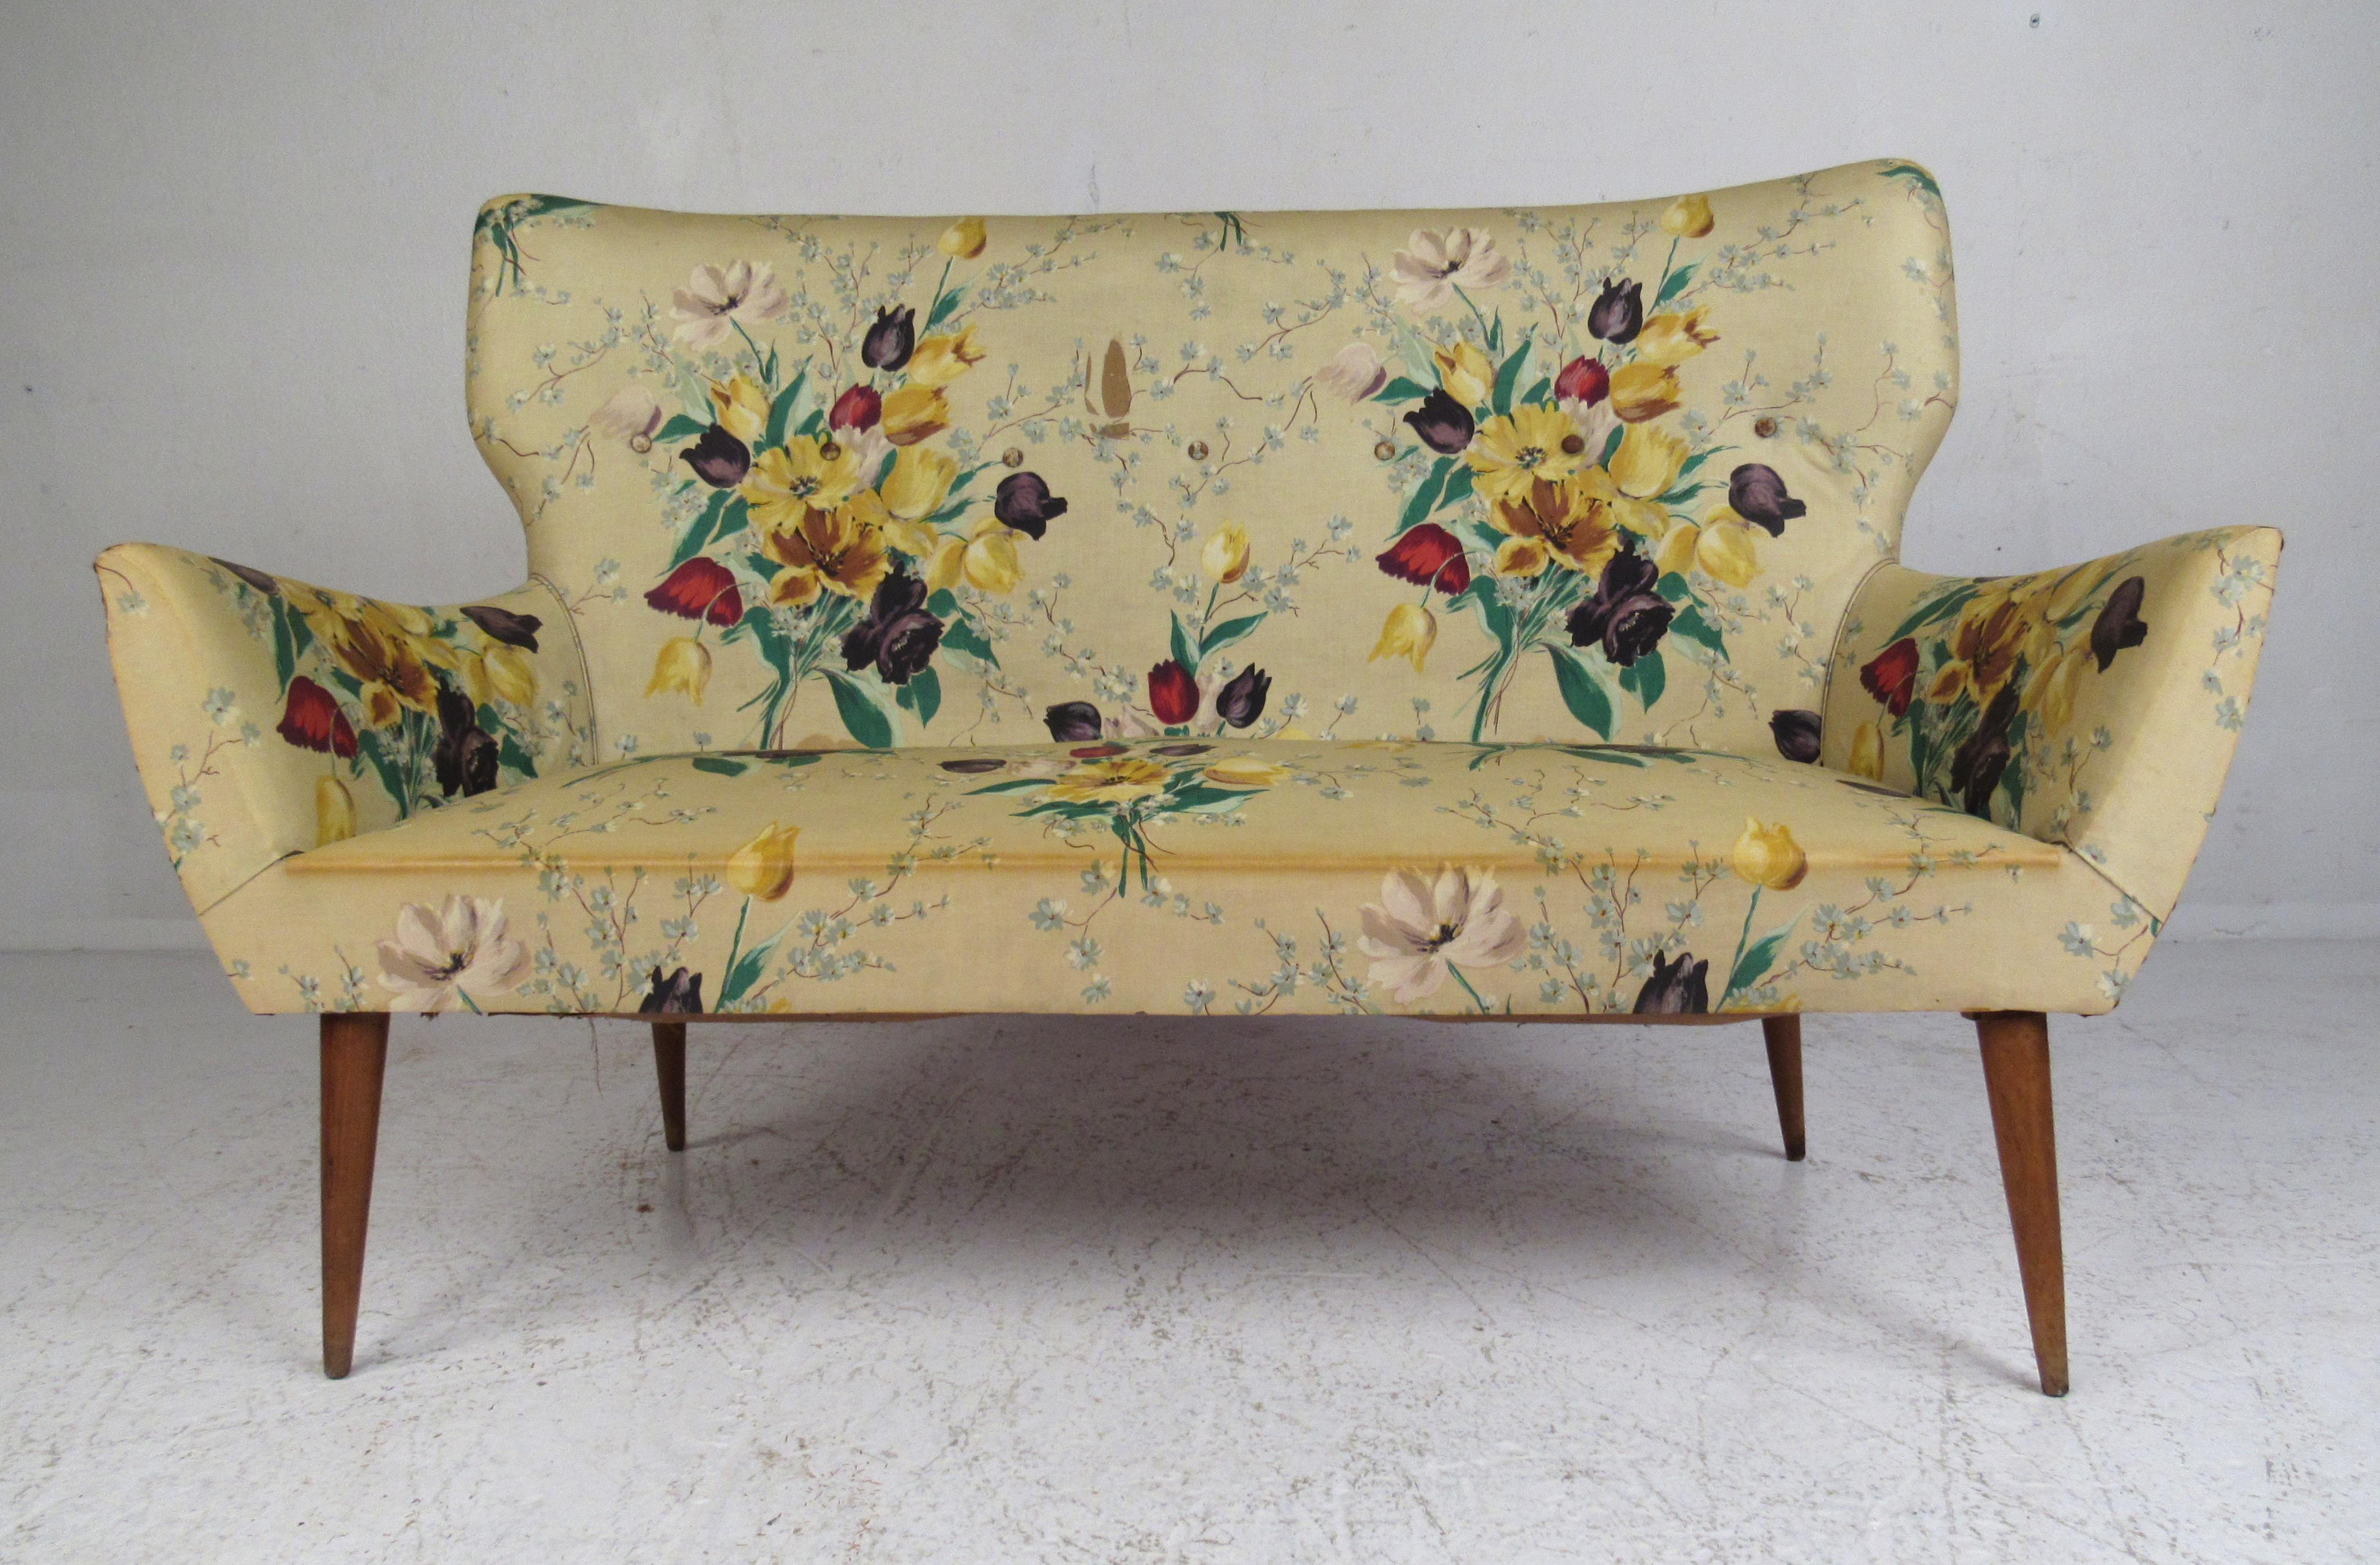 This stunning vintage modern settee features tapered walnut legs and decorative floral upholstery. The unique winged backrest and armrests are sure to make this piece stand out in any seating arrangement. Please confirm item location (NY or